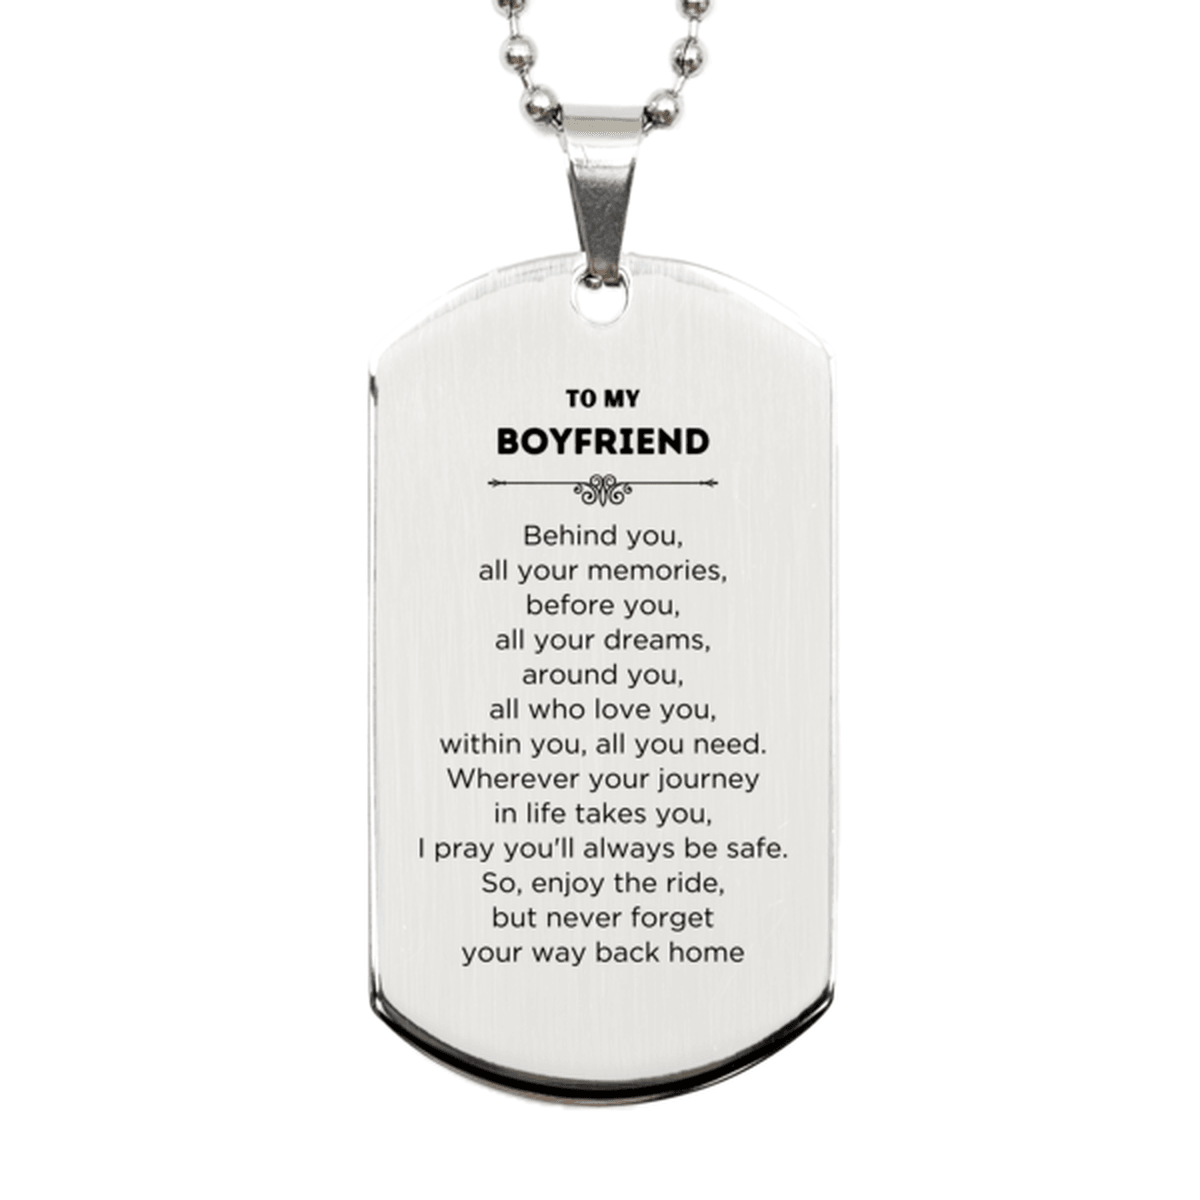 Boyfriend Silver Dog Tag Necklace Bracelet Birthday Christmas Unique Gifts Behind you, all your memories, before you, all your dreams - Mallard Moon Gift Shop